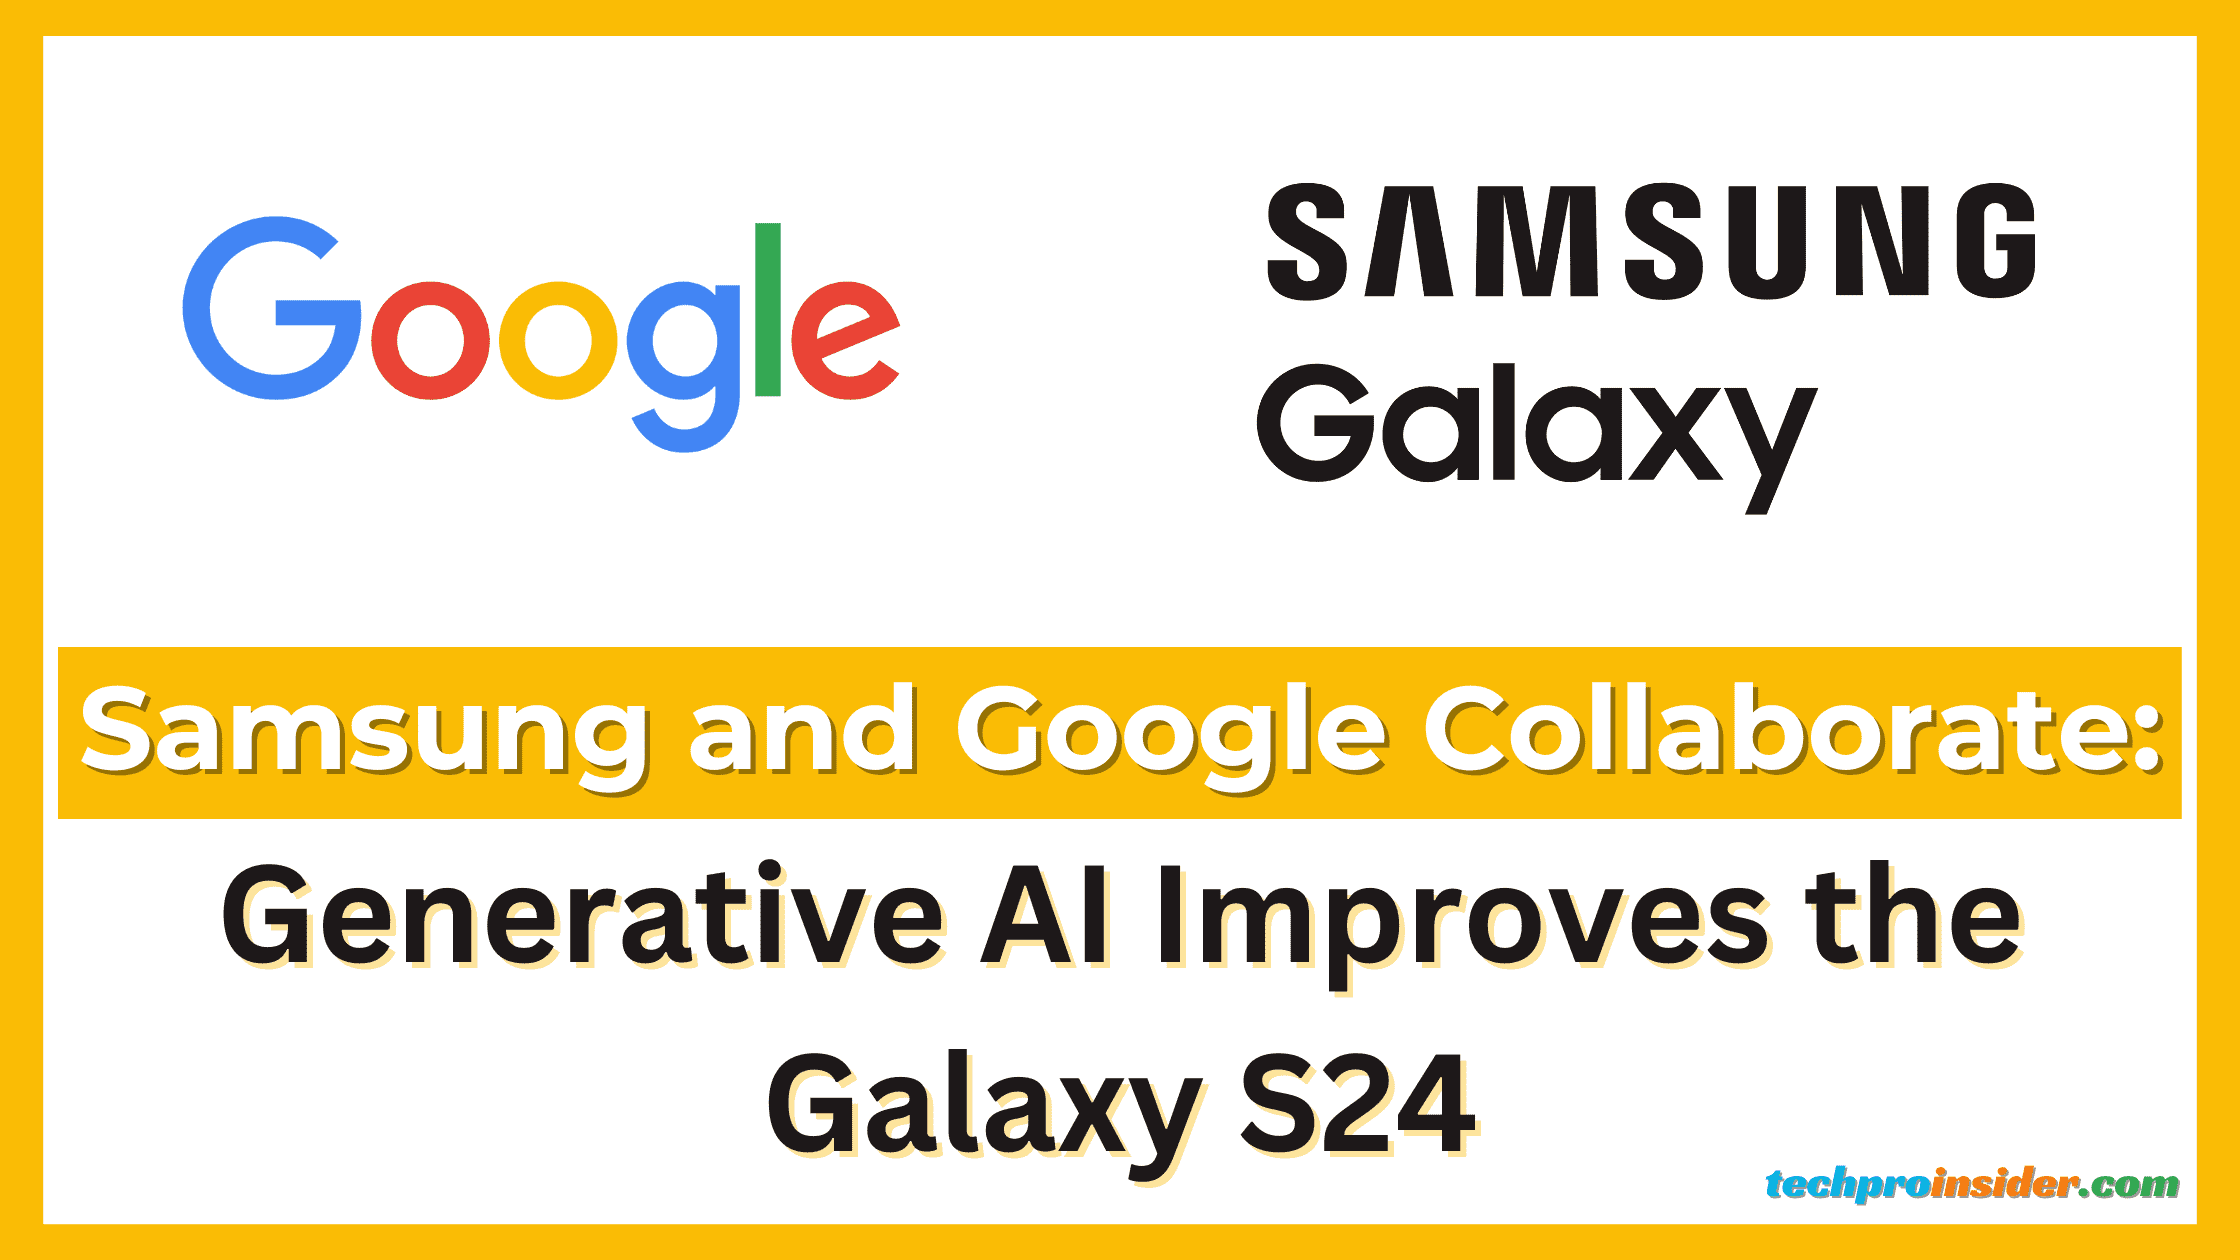 Samsung and Google Collaborate: Generative AI Improves the Galaxy S24